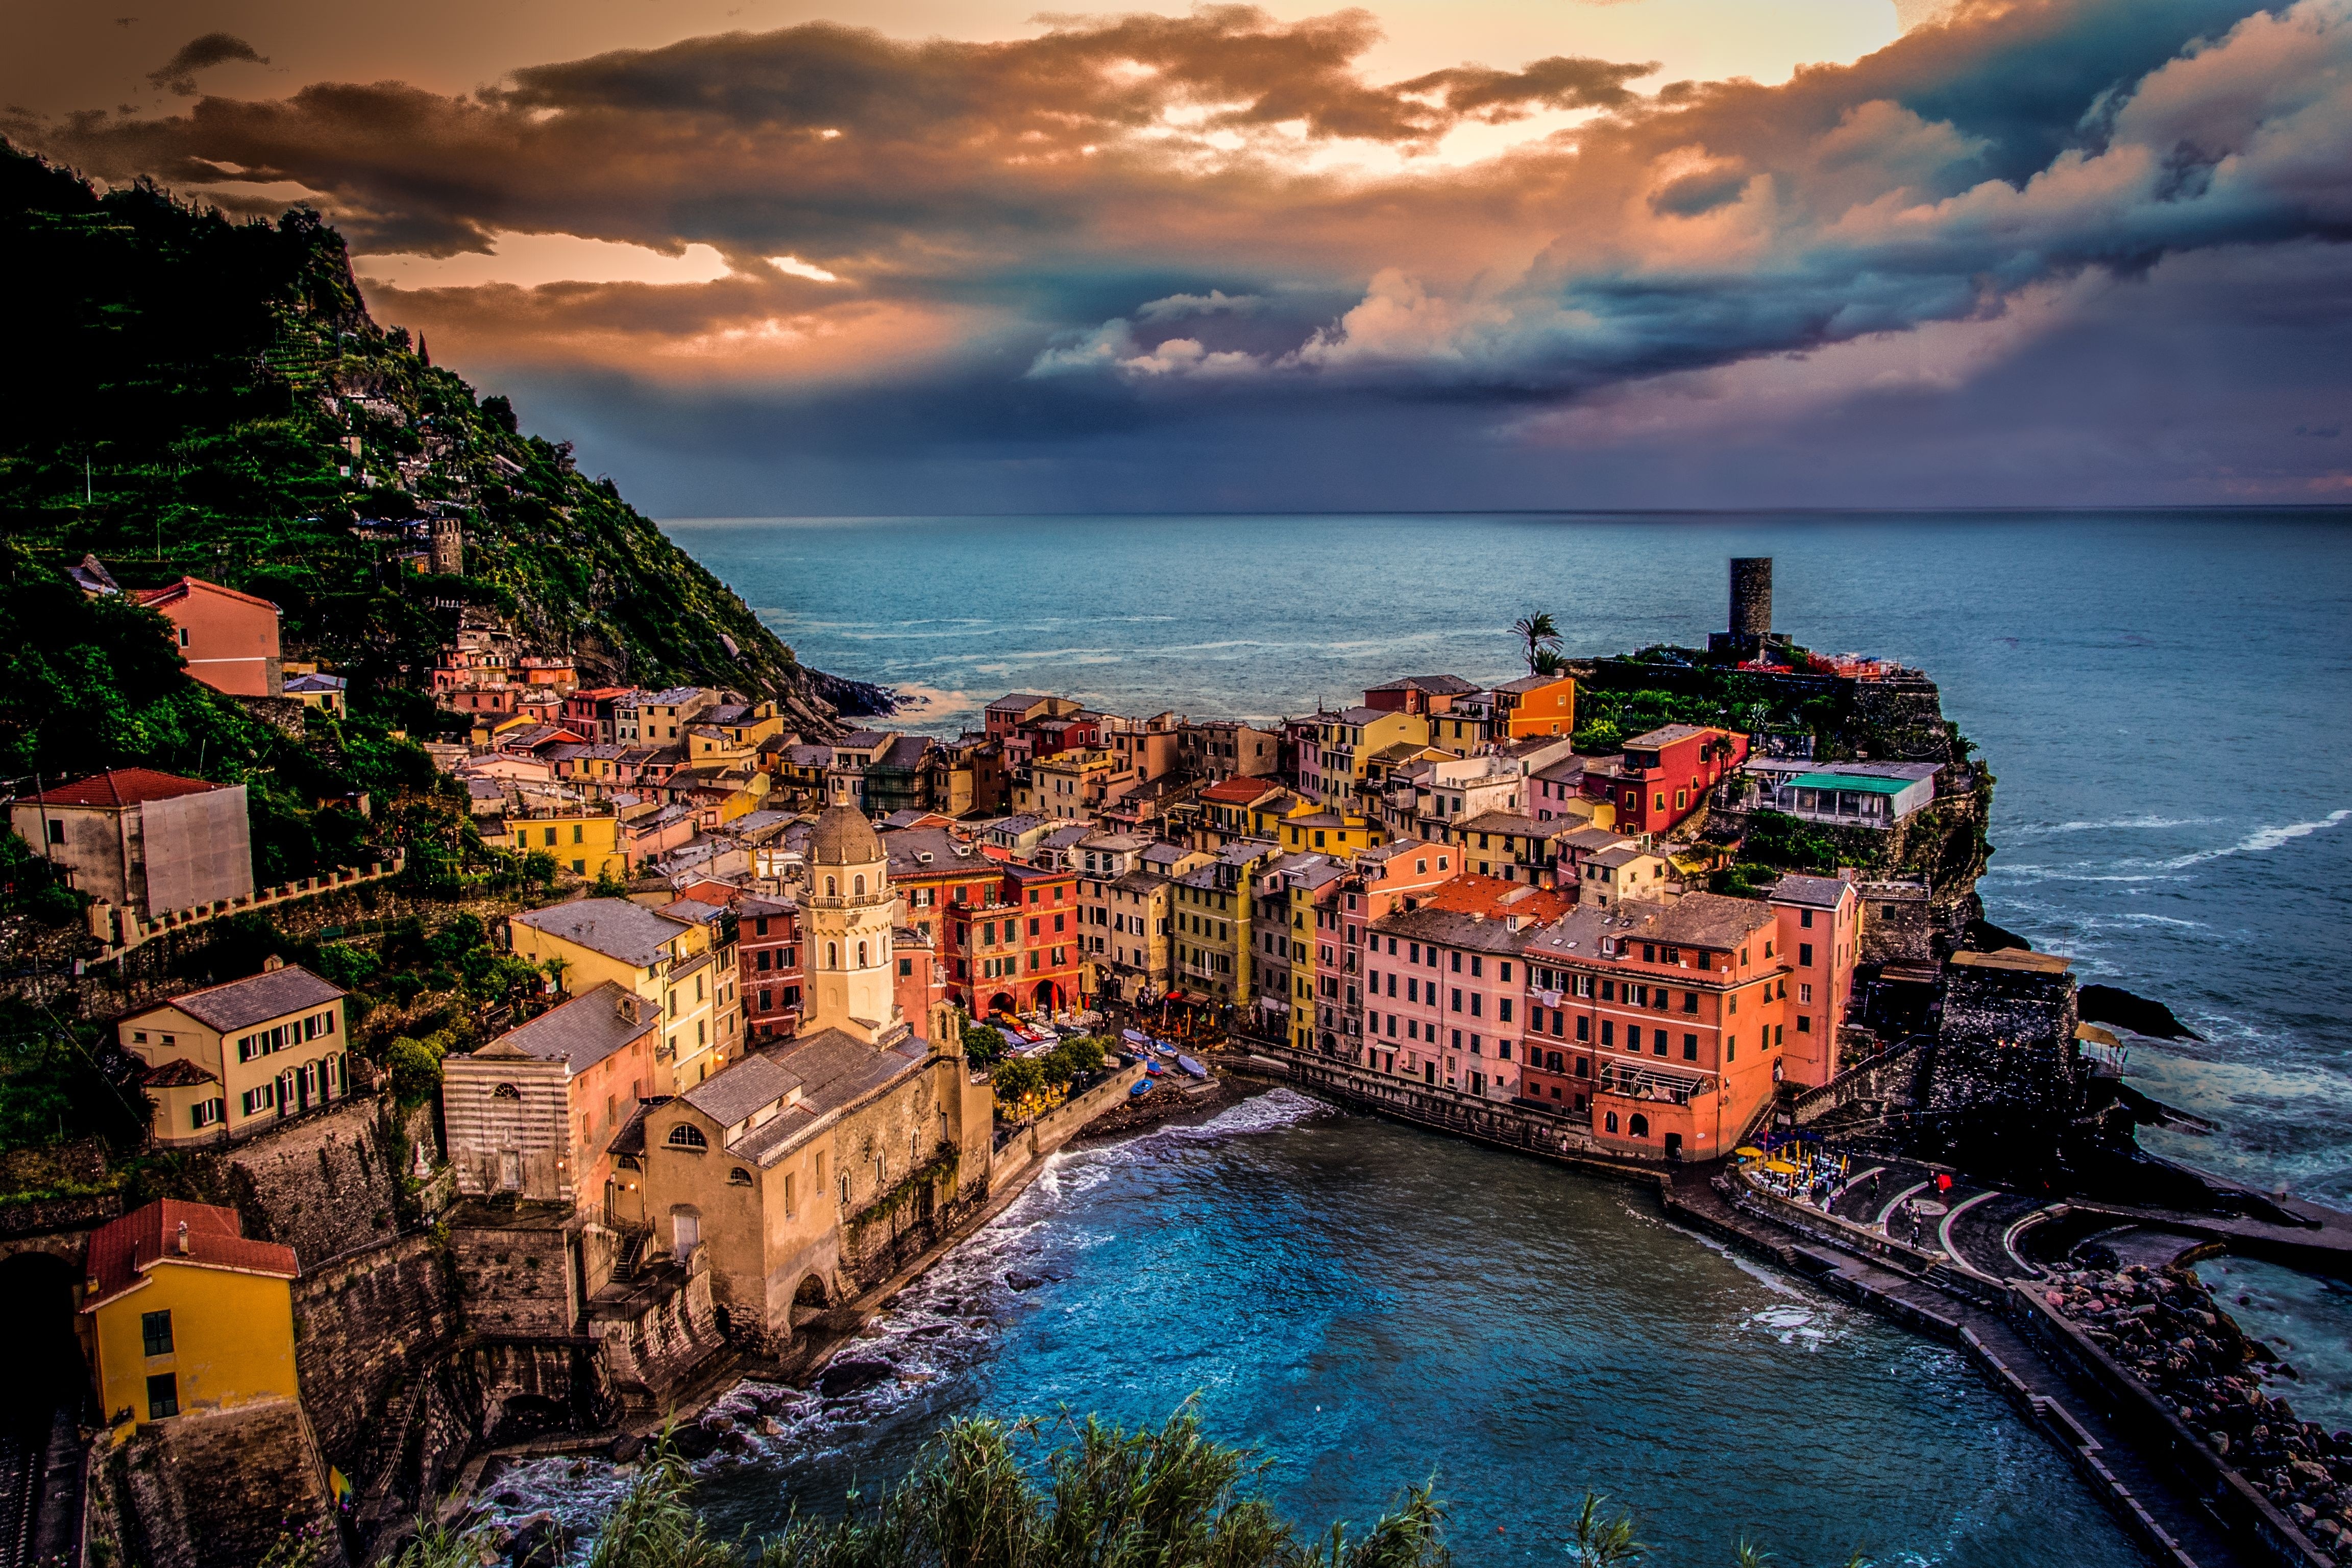 italy, man made, vernazza, colorful, horizon, house, ocean, town, towns